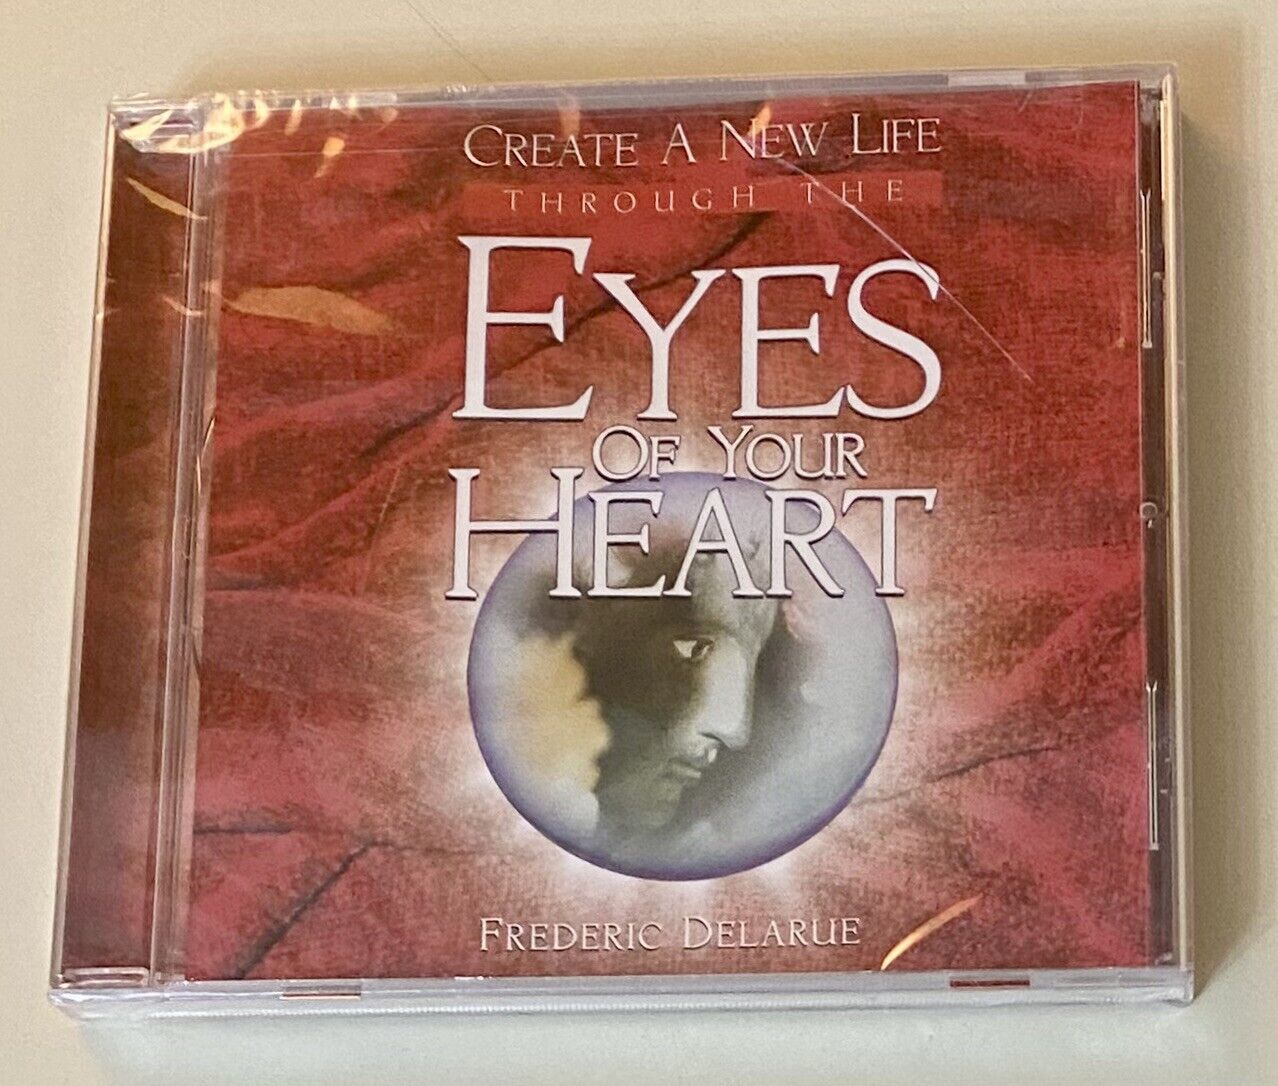 Frederic Delarue - Eyes Of Your Heart CD - NEW SEALED